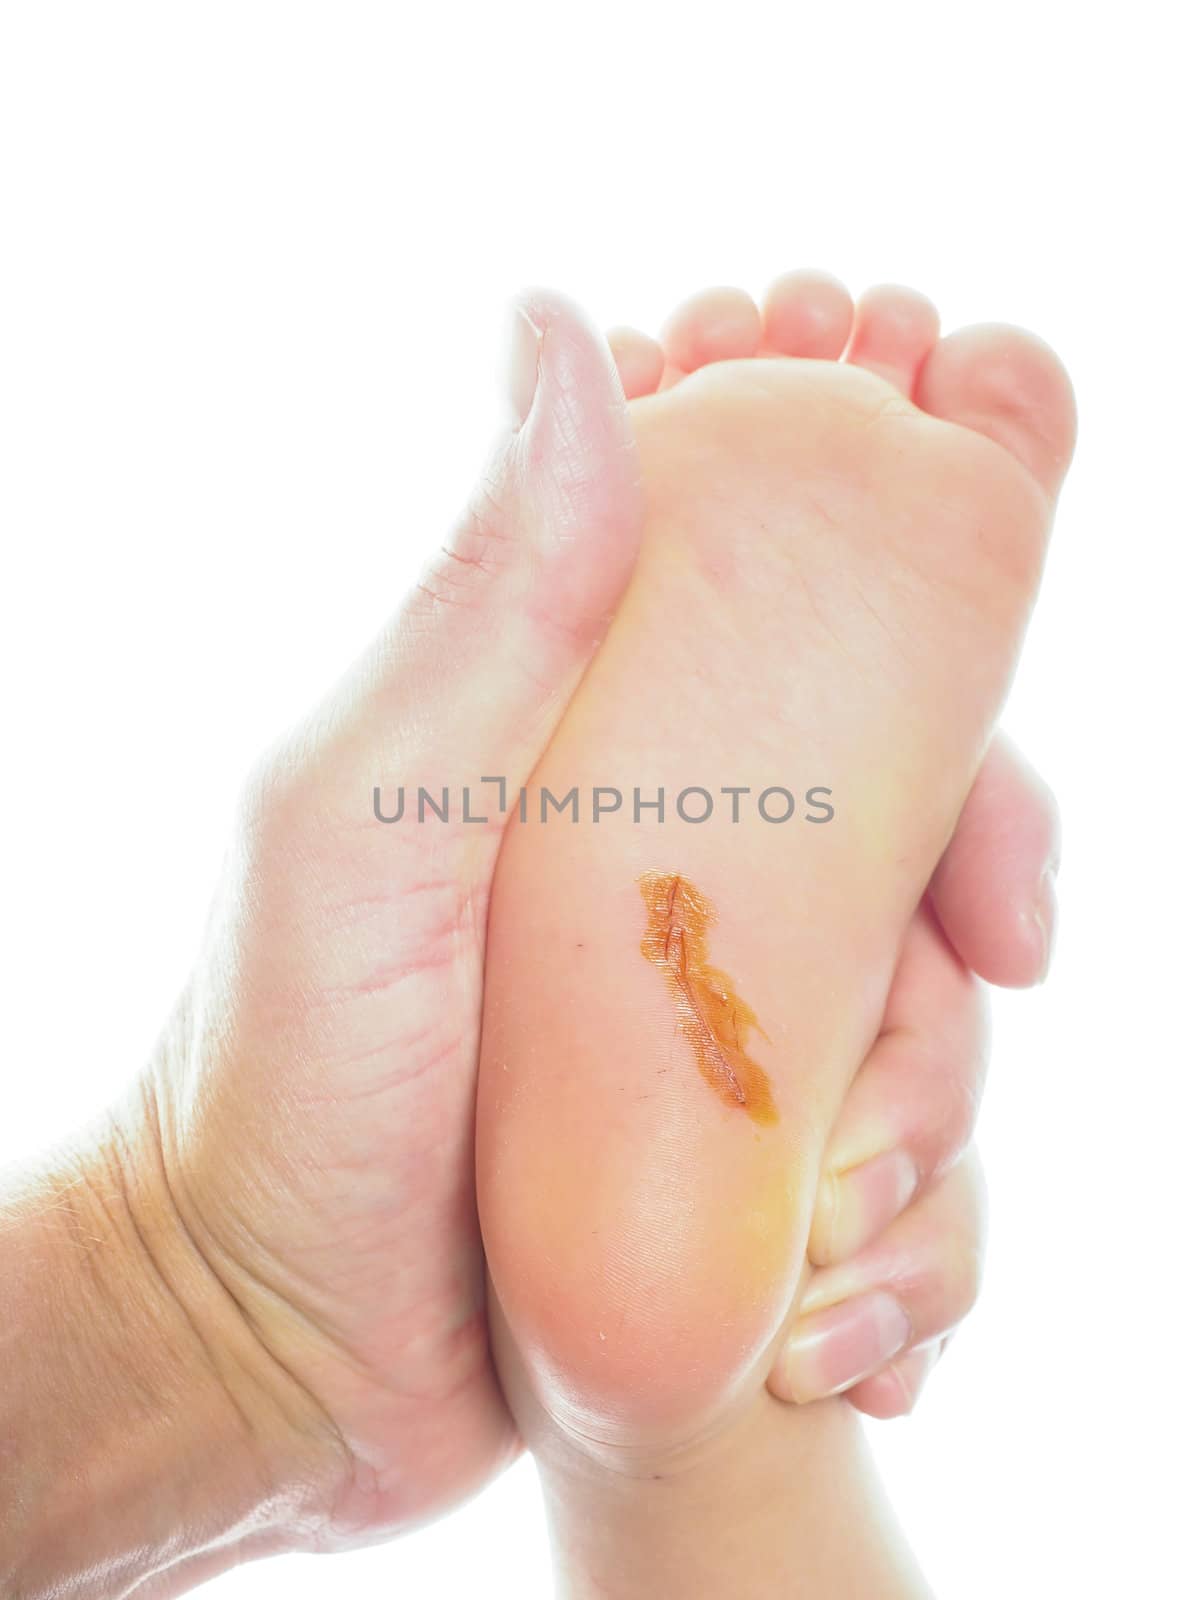 Child with a long cut under foot on heel with antiseptic, being  by Arvebettum